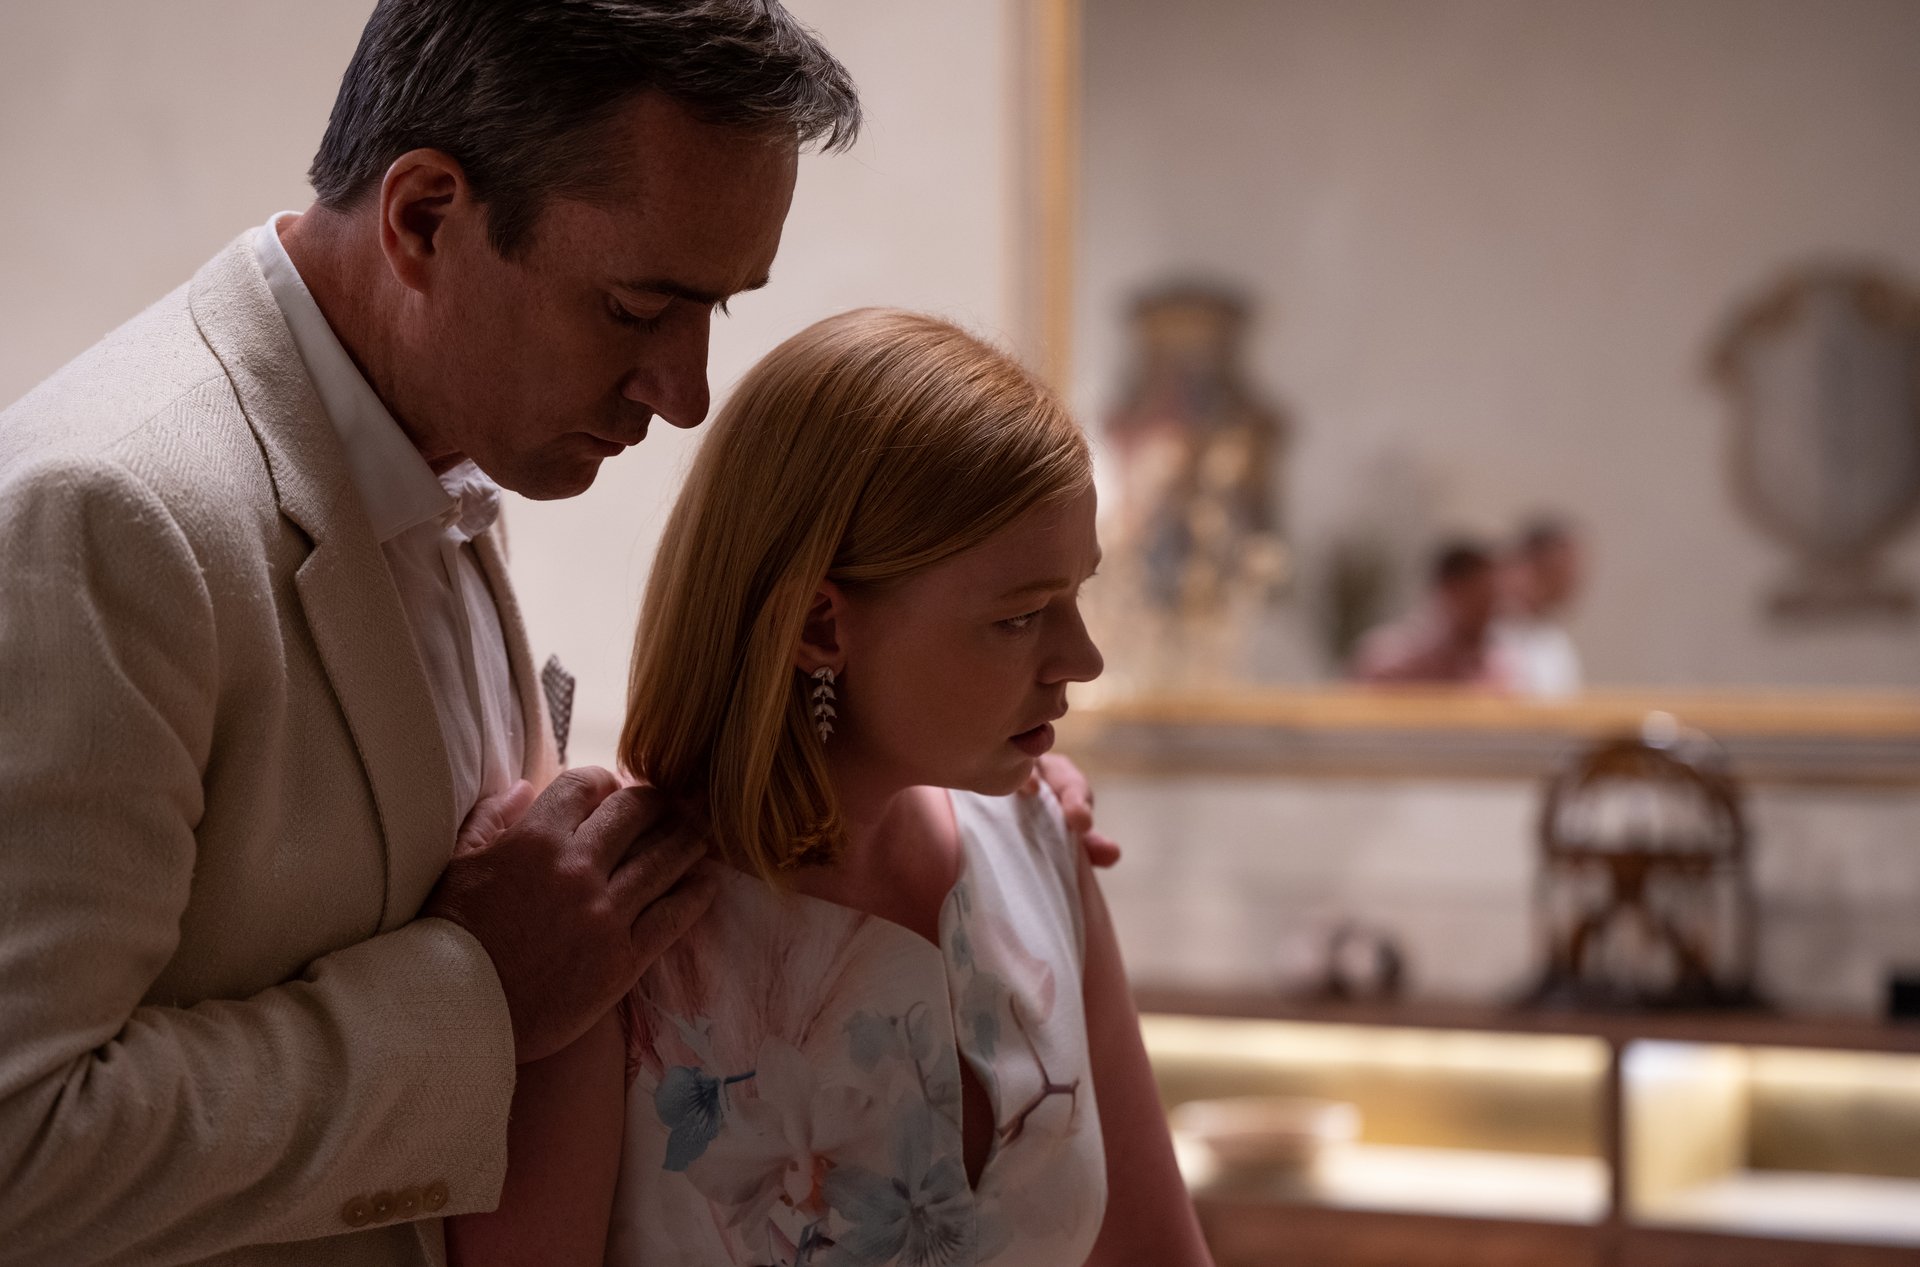 Matthew Macfadyen as Tom and Sarah Snook as Shiv in the 'Succession' Season 3 finale. He's holding her shoulders, and she looks upset.